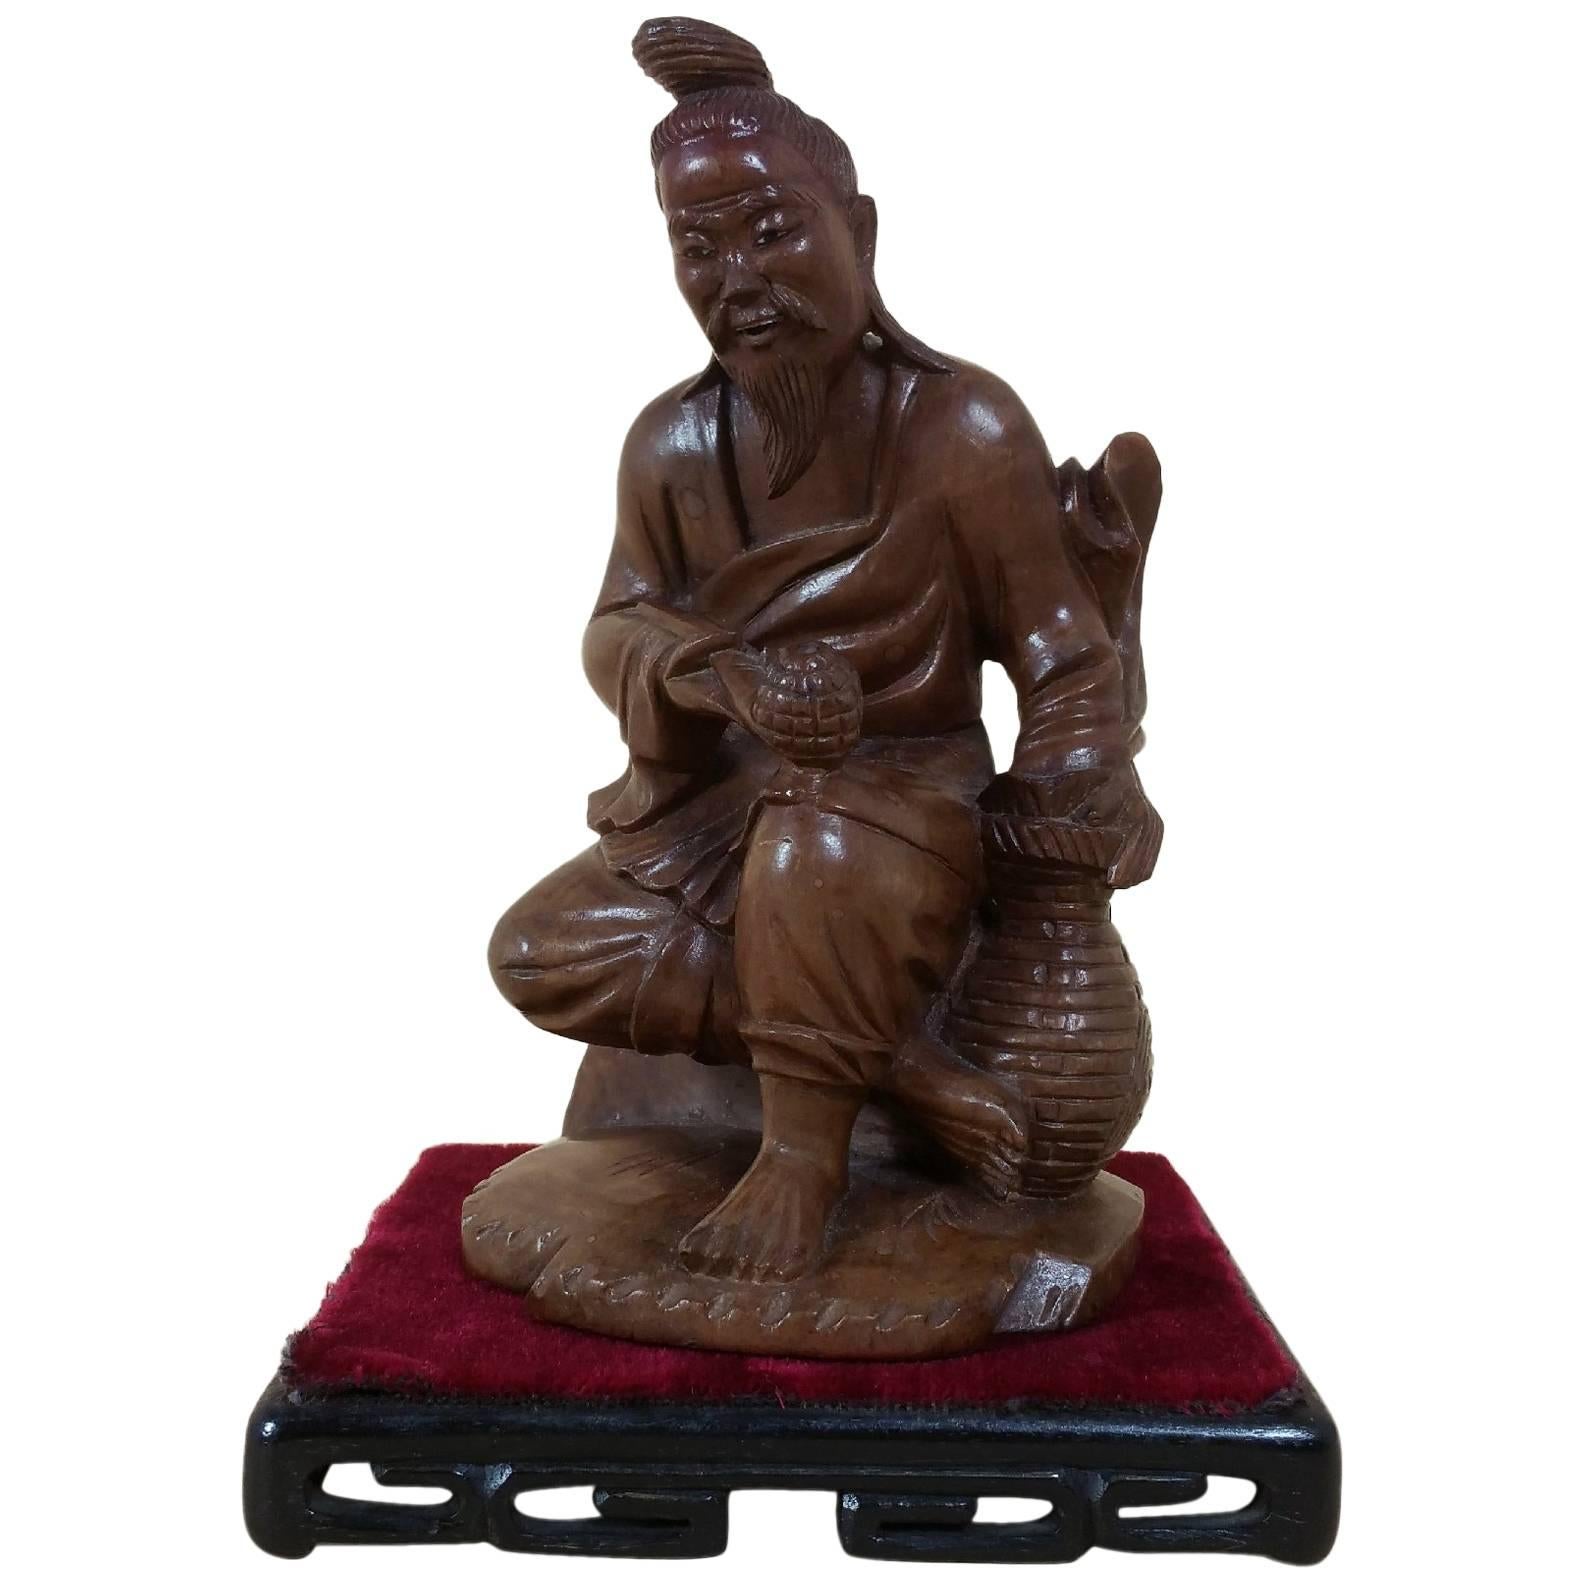 Japanese Fruitwood Carving of a Gentleman Smoking a Pipe